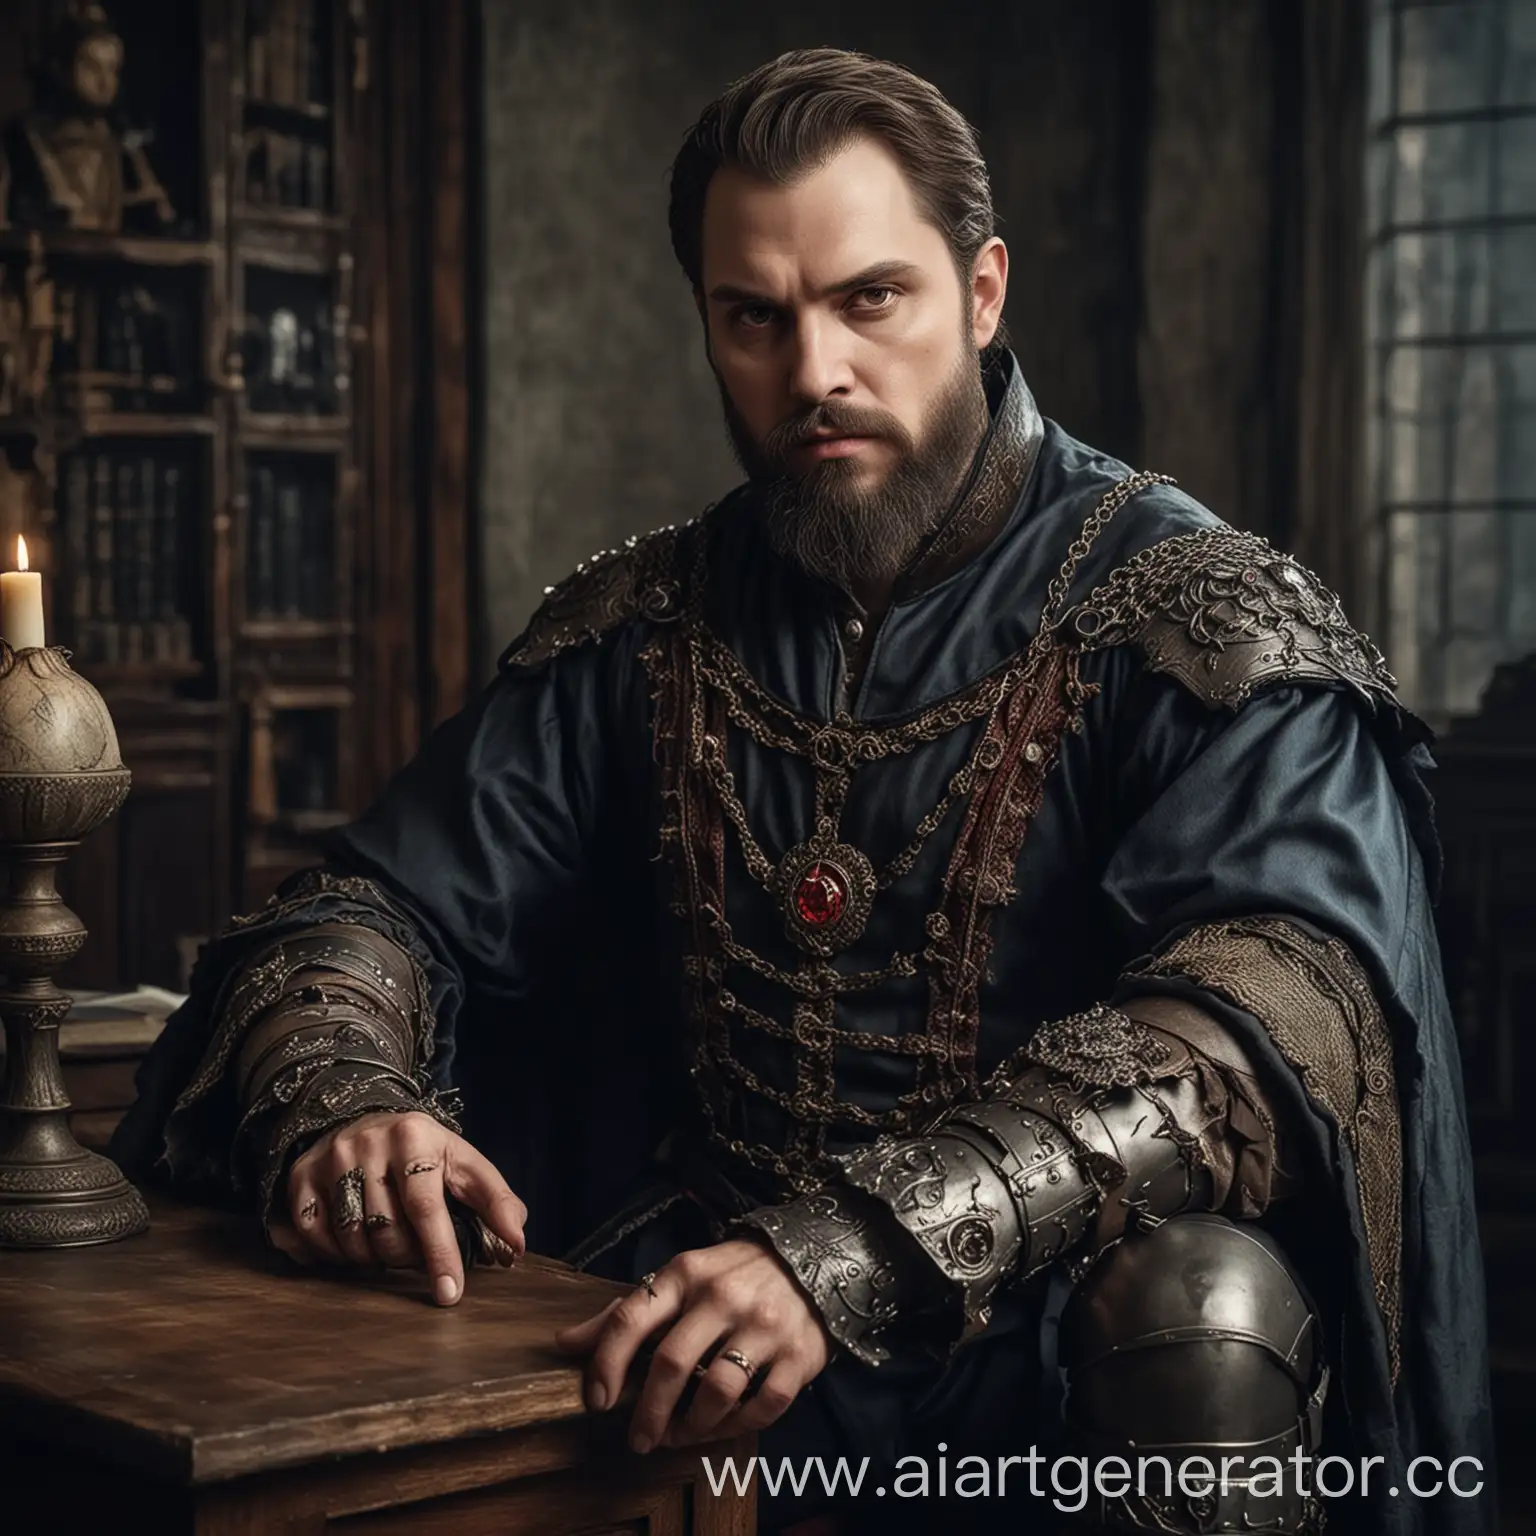 Portray the vampire prince from the world of darkness setting. He is dressed in 16th century clothes, he is 45 years old, chubby and bearded. Instead of one of his hands, he has a medieval iron prosthesis. He is sitting in a modern office